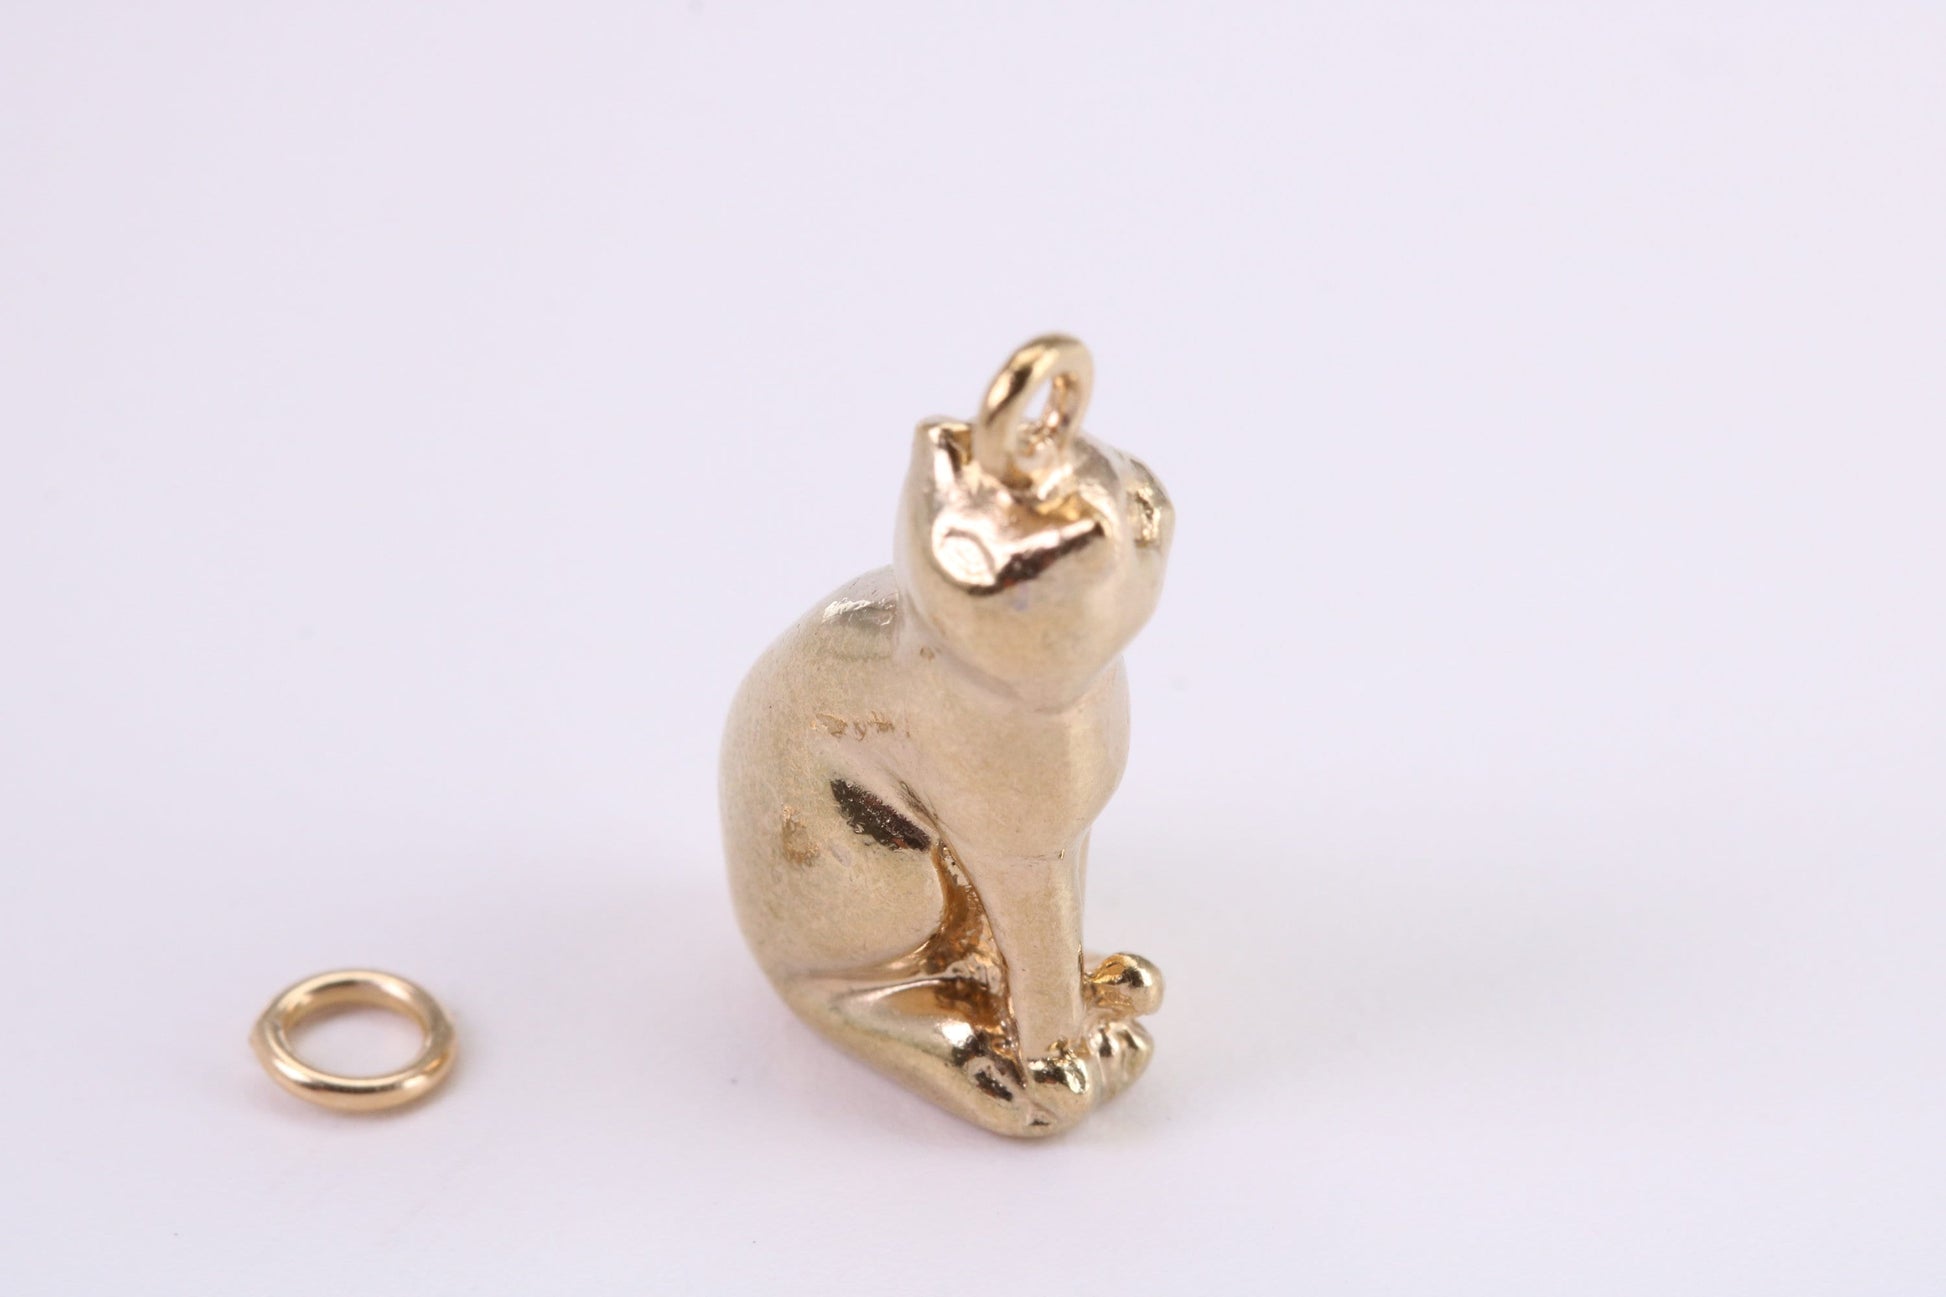 Large Sitting Cat Charm, Traditional Charm, Made from Solid Yellow Gold, British Hallmarked, Complete with Attachment Link